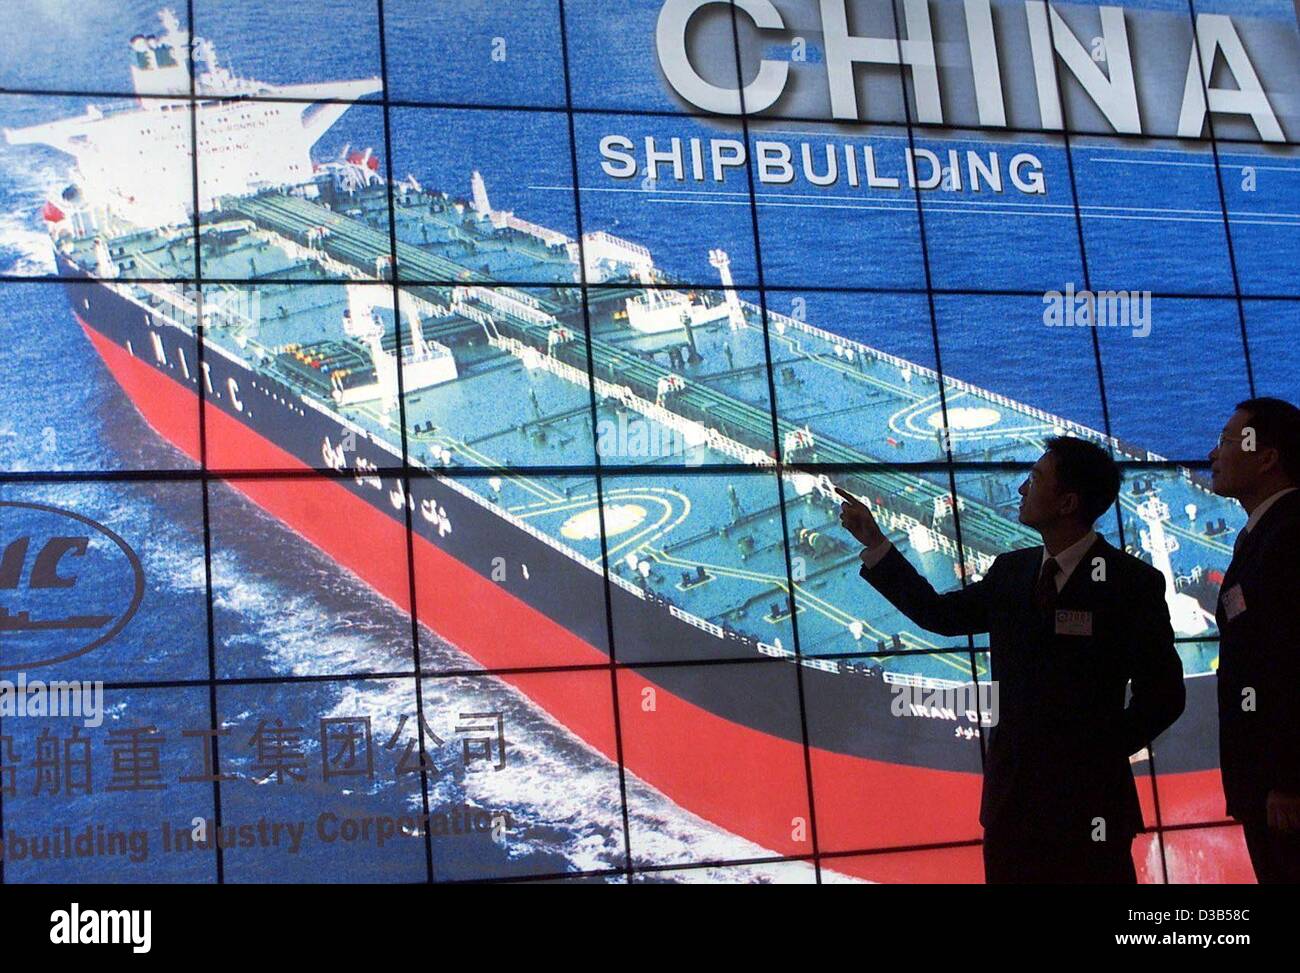 (dpa) - Two men look at a screen showing a photo of a Chinese super tanker on the opening day of the International Shipbuilding Trade Fair SMM in Hamburg, 24 September 2002. 1400 exhibitors from 52 nations present their products of Shipbuilding, Machinery and Marine Technology until 28 September. Ch Stock Photo